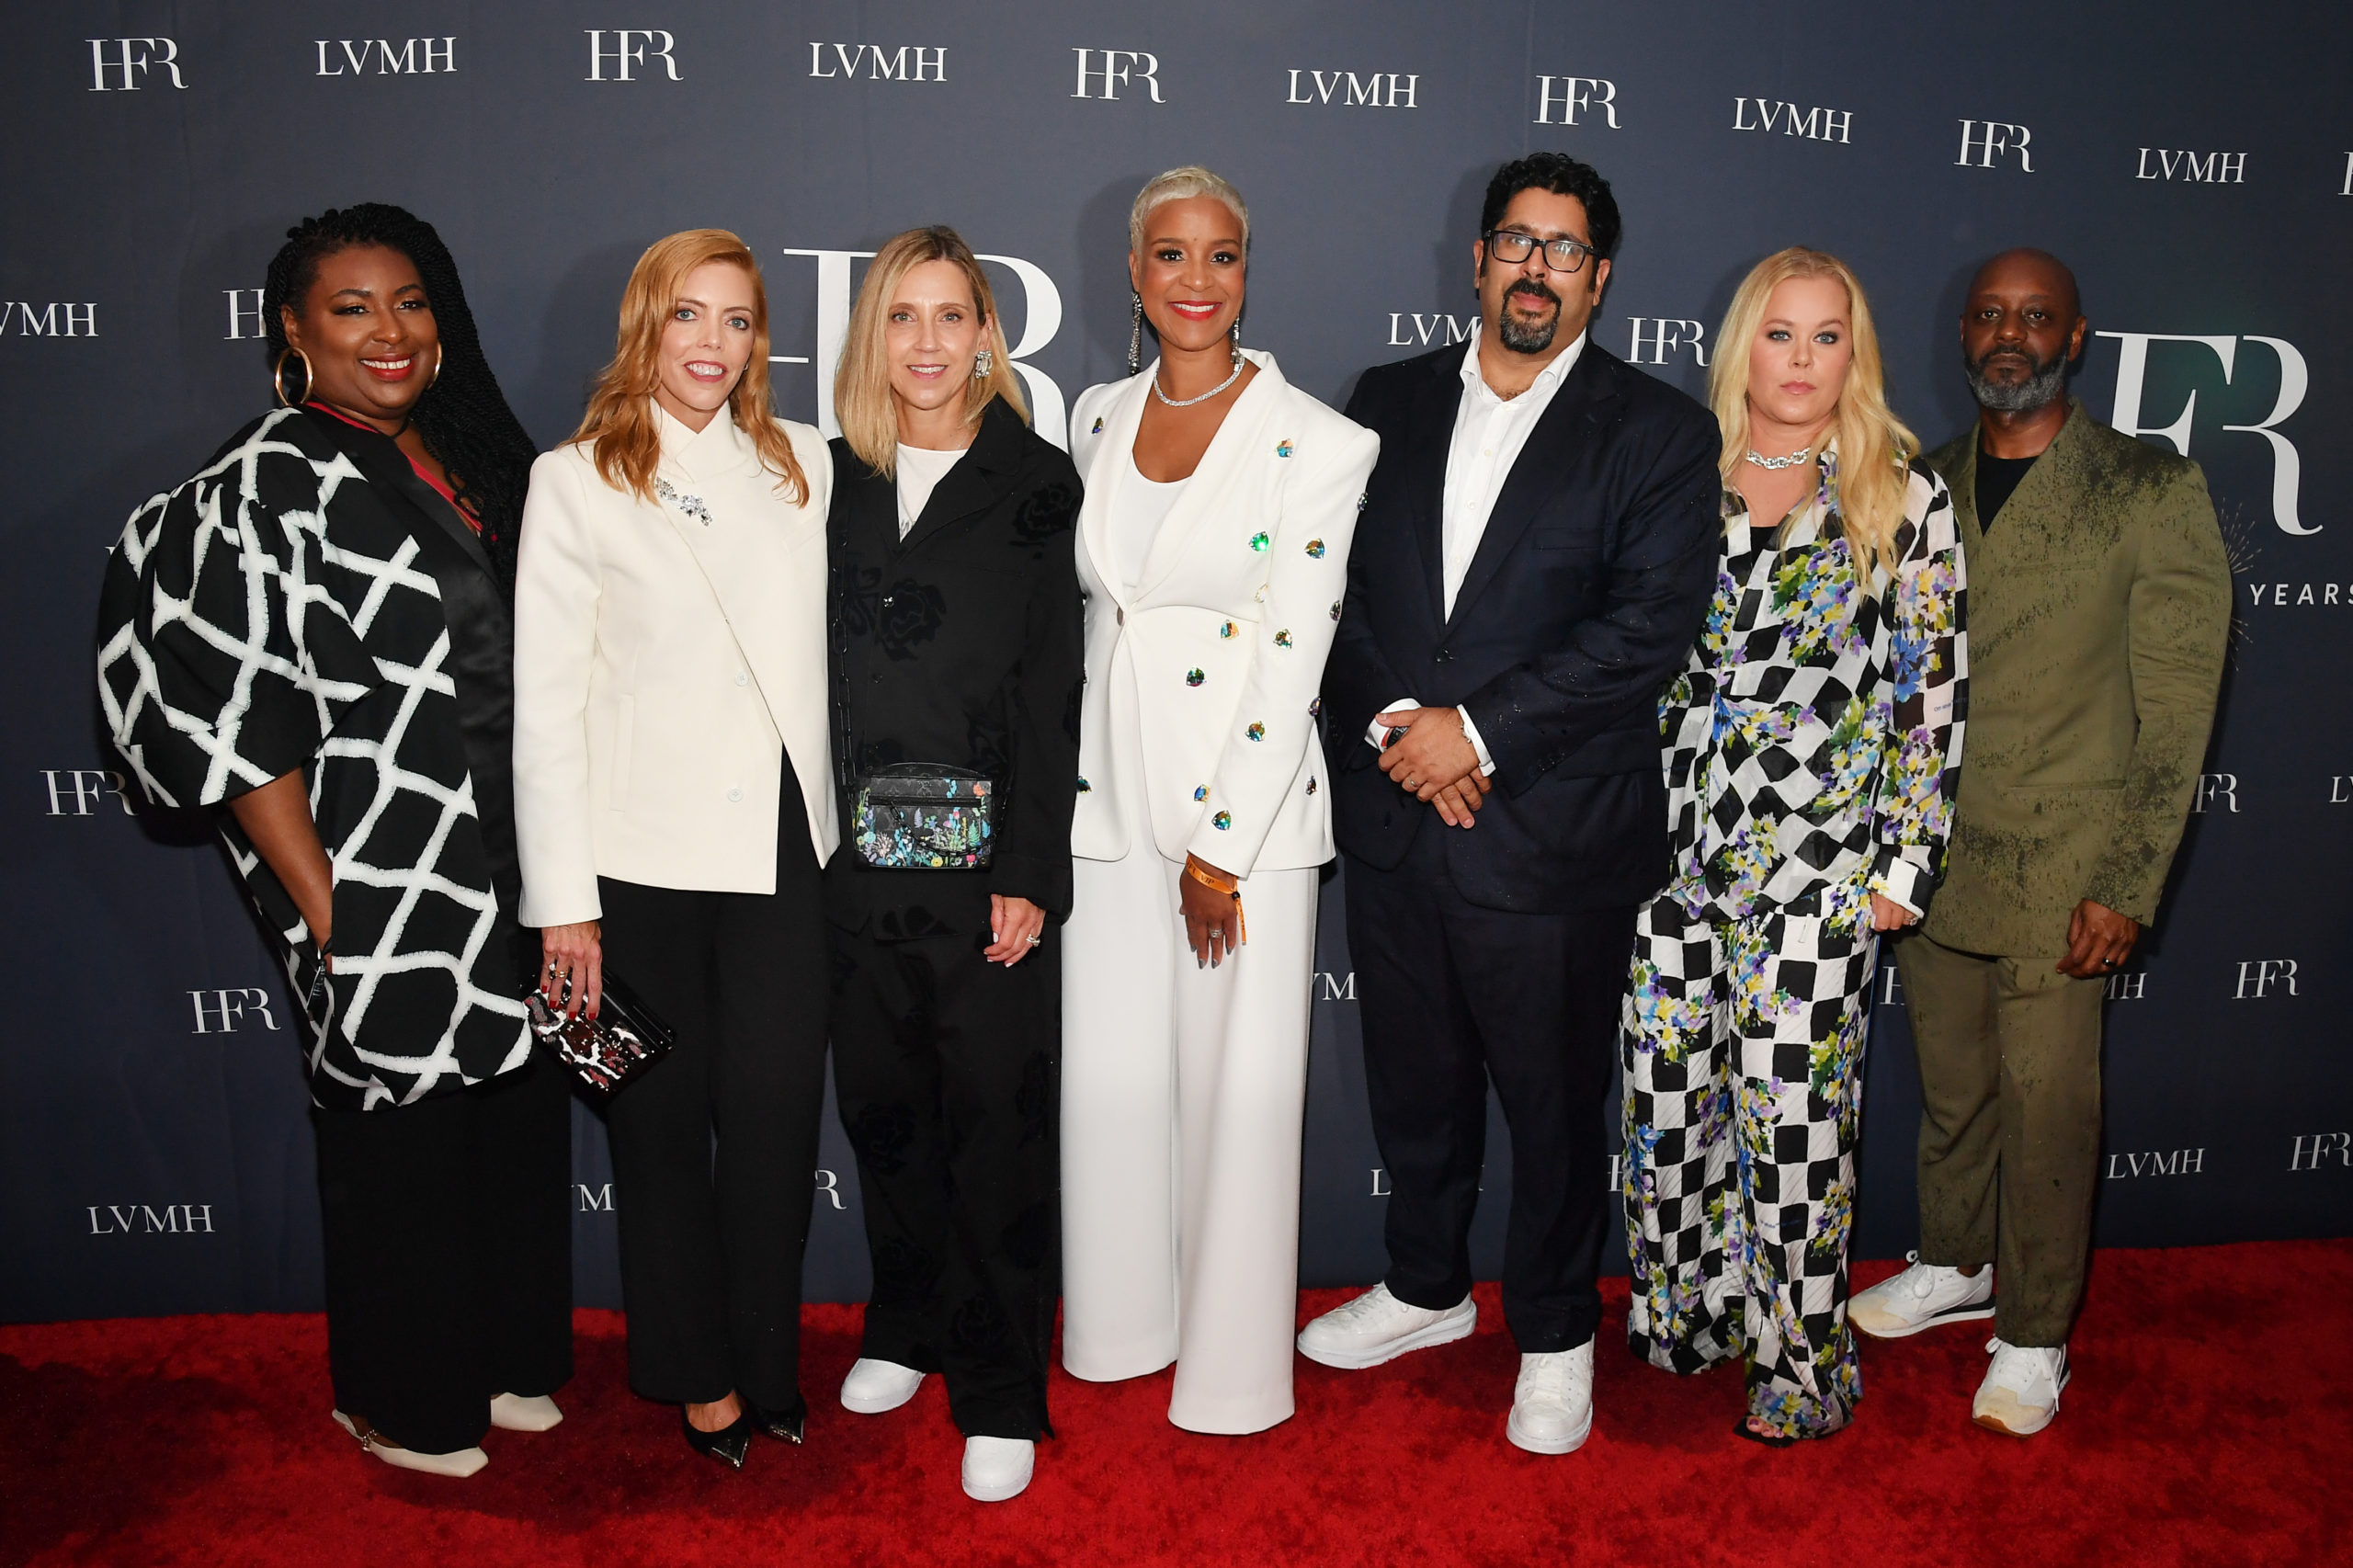 LVMH strengthens its commitment to building an inclusive company